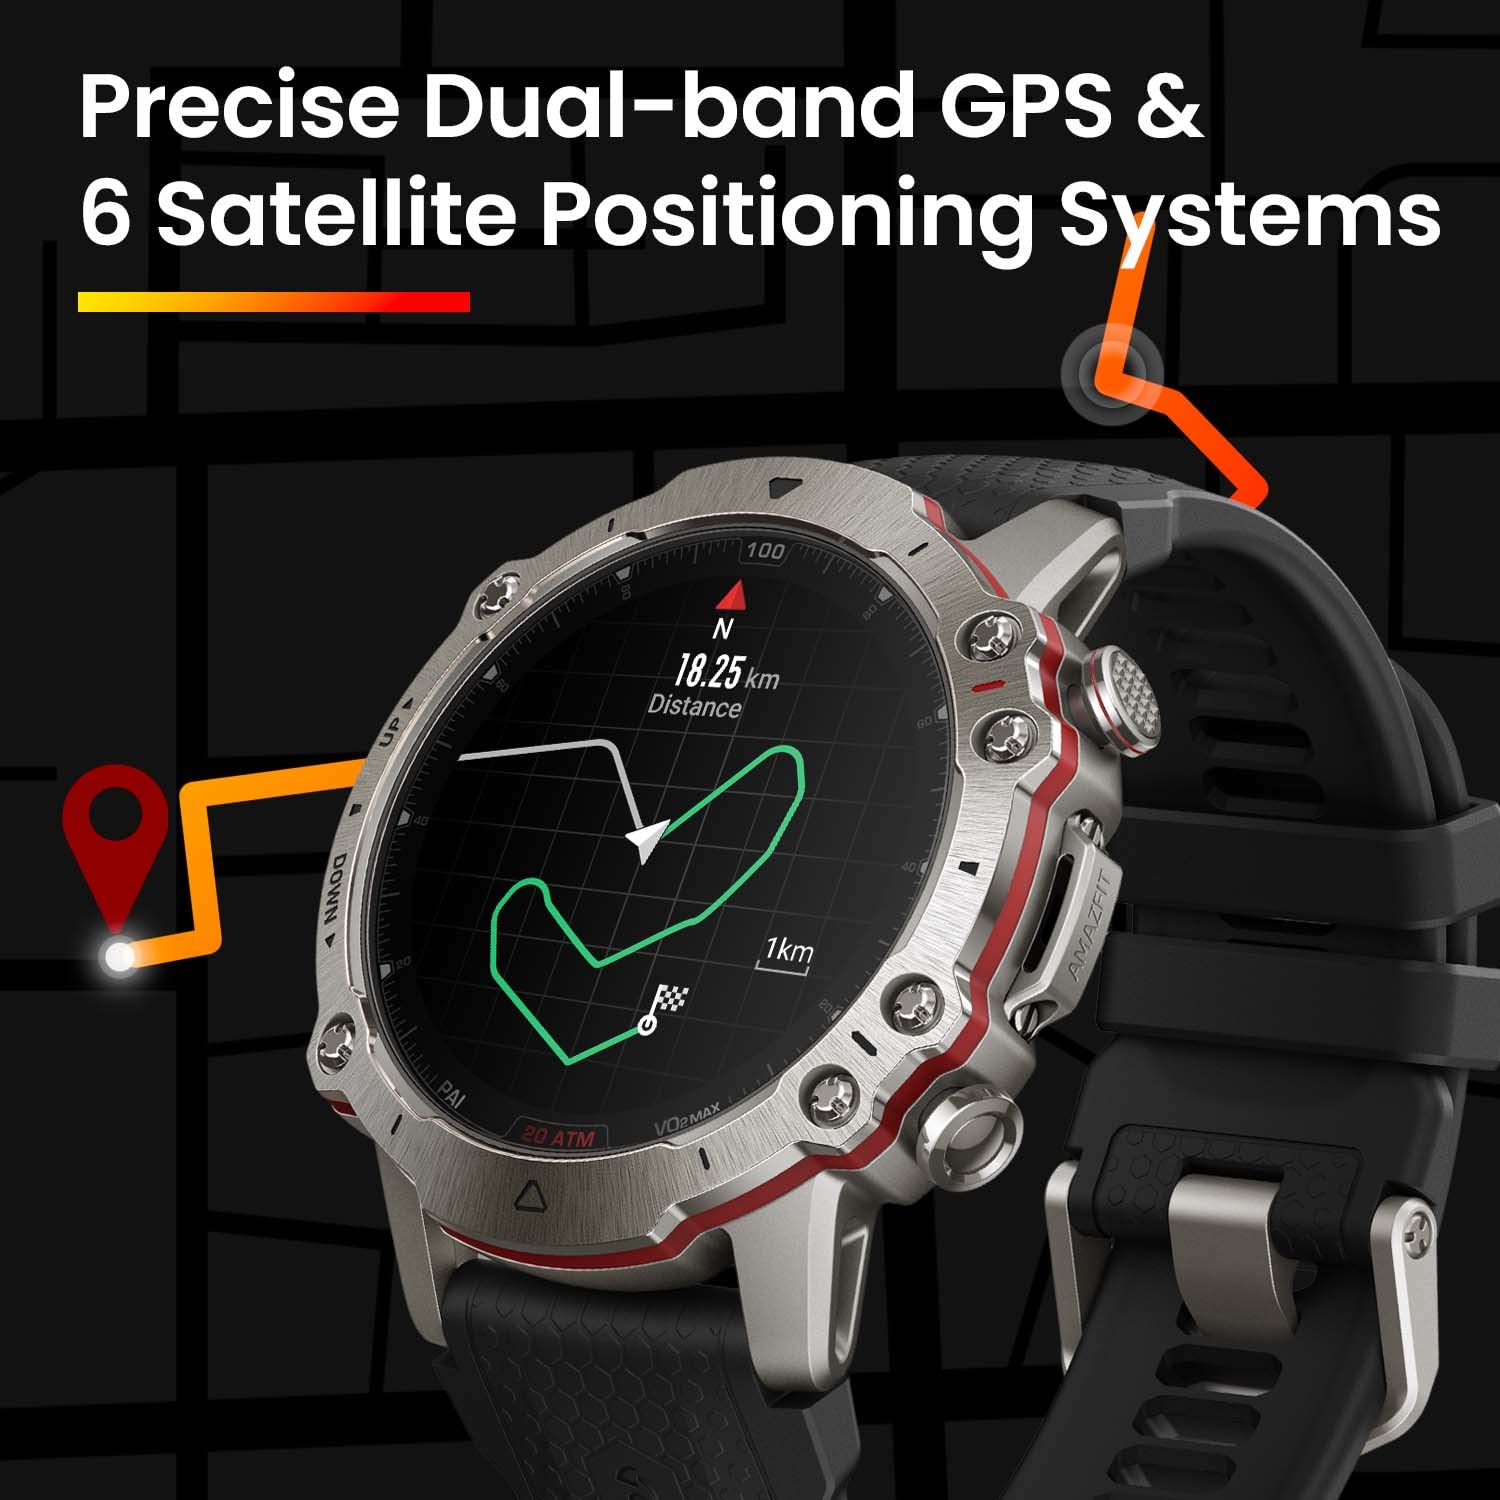 Amazfit Falcon Premium Military Smart Watch, Offline Map Support, 14 Days Battery Life, Dual-Band & 6 Satellite Positioning, Strength Training, Titanium Body, 200m Water-Resistance, Sports GPS Watch